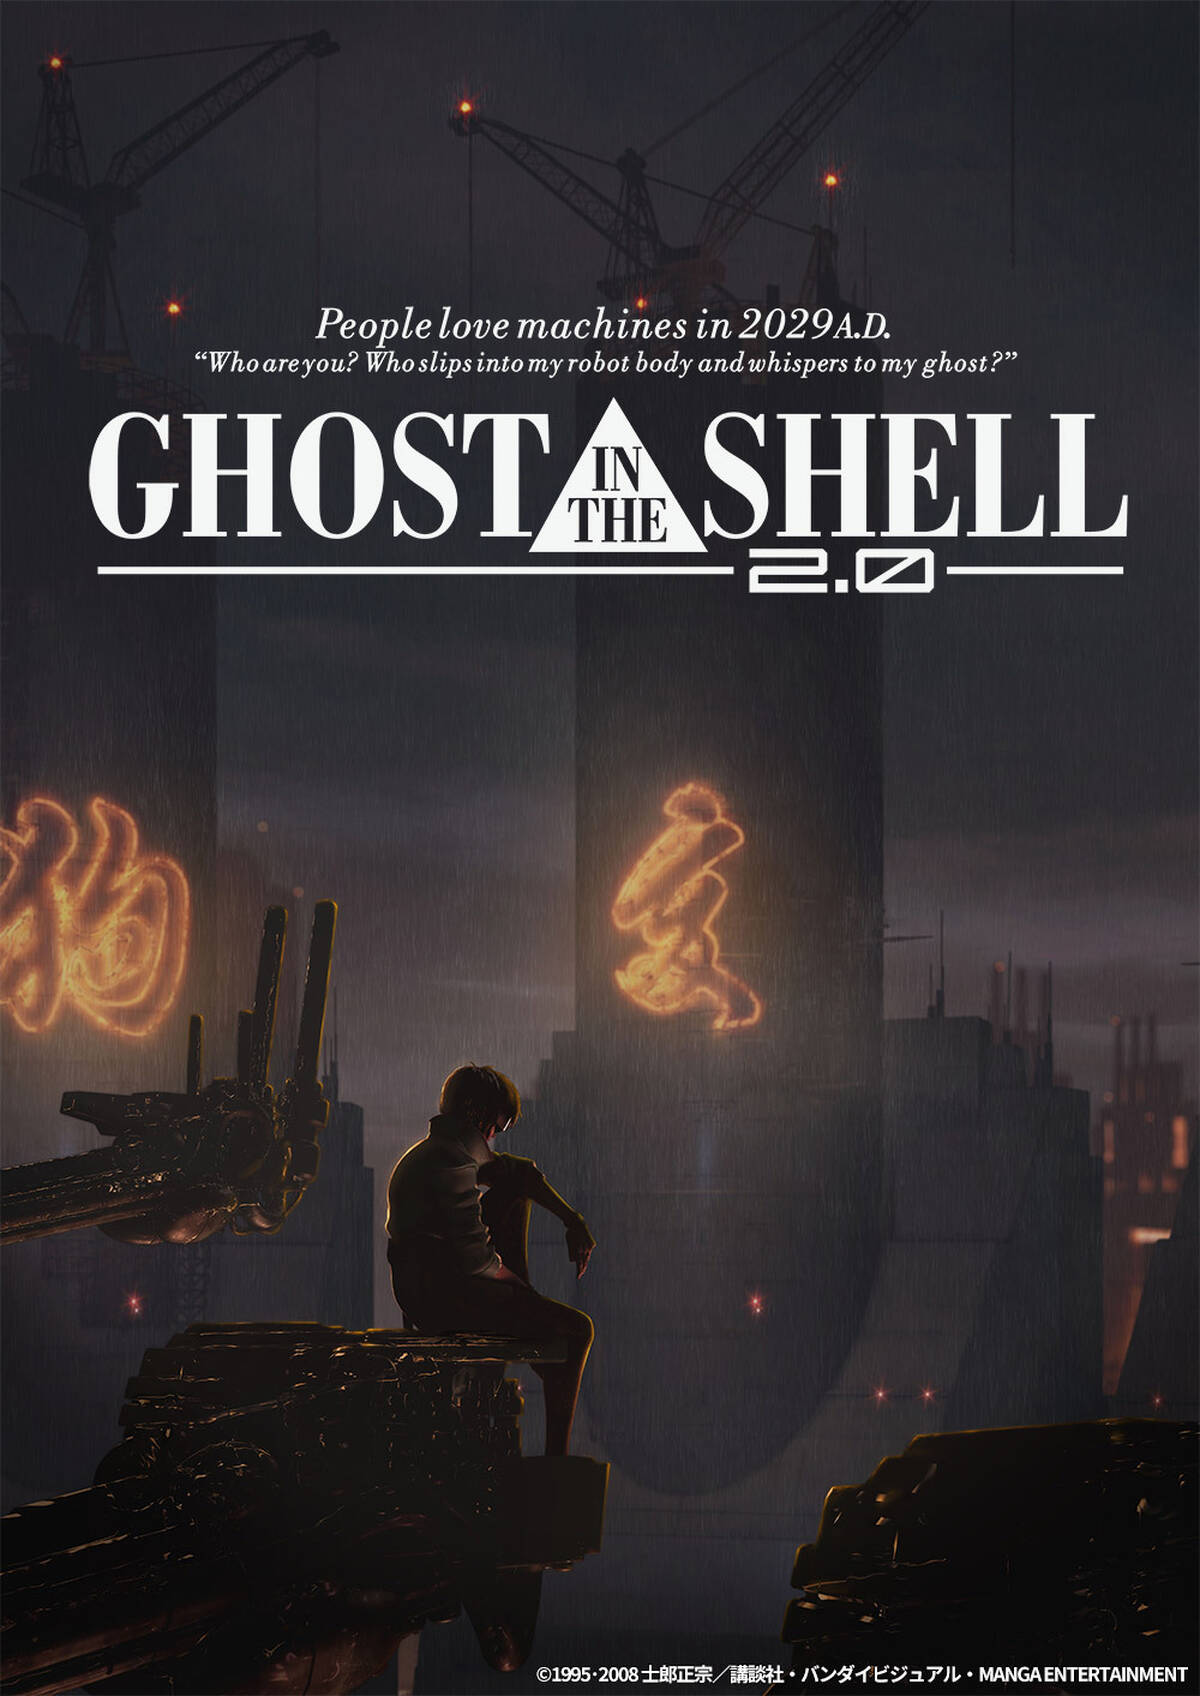 Ghost In The Shell 2月21日放送決定 アキバ総研